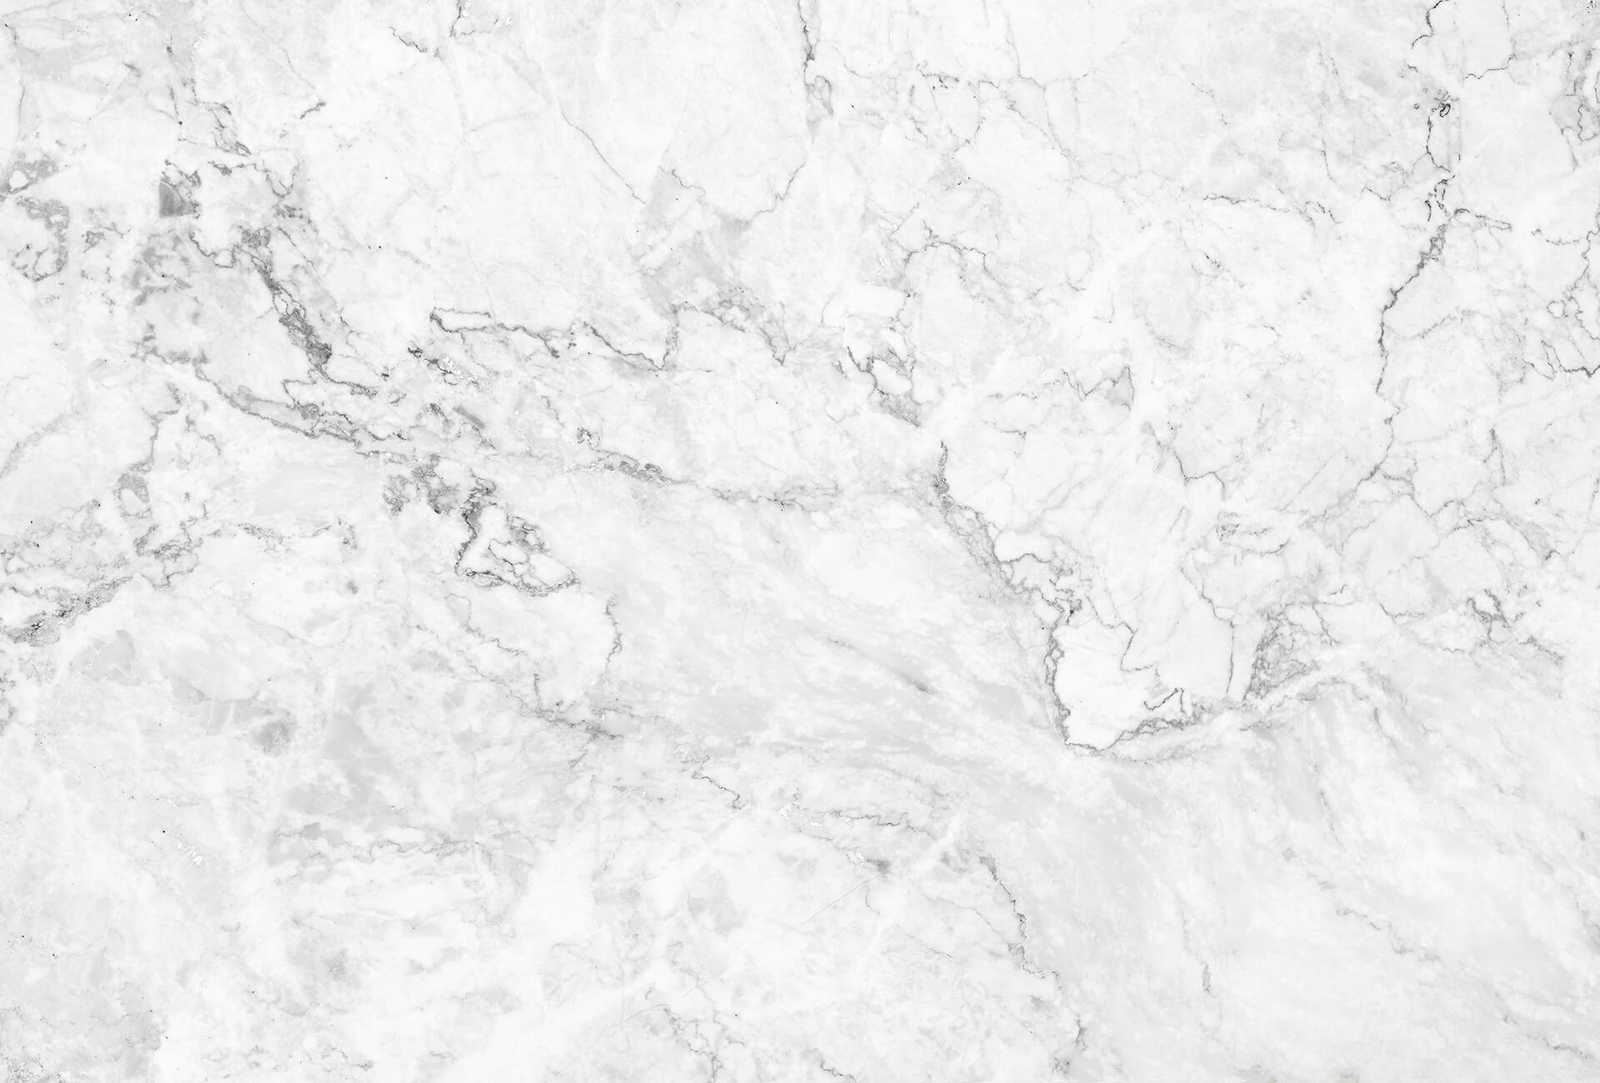         Photo wallpaper white marble with grey accents
    